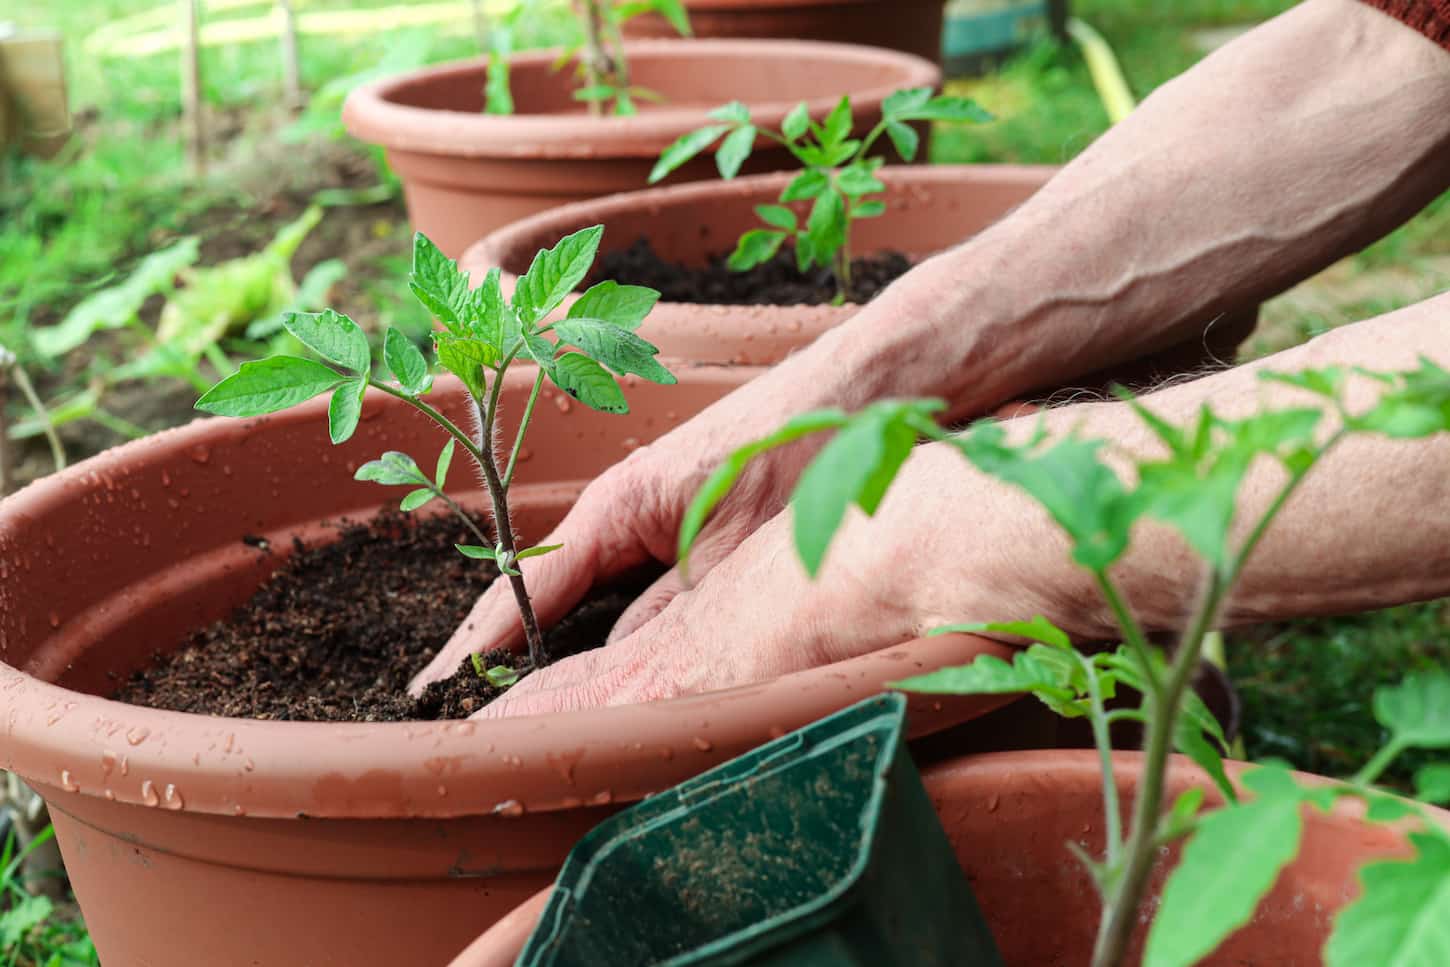 An image of the hands of a man planting a young green tomato sprout into the pot, close up, spring gardening as a hobby and natural food concept.